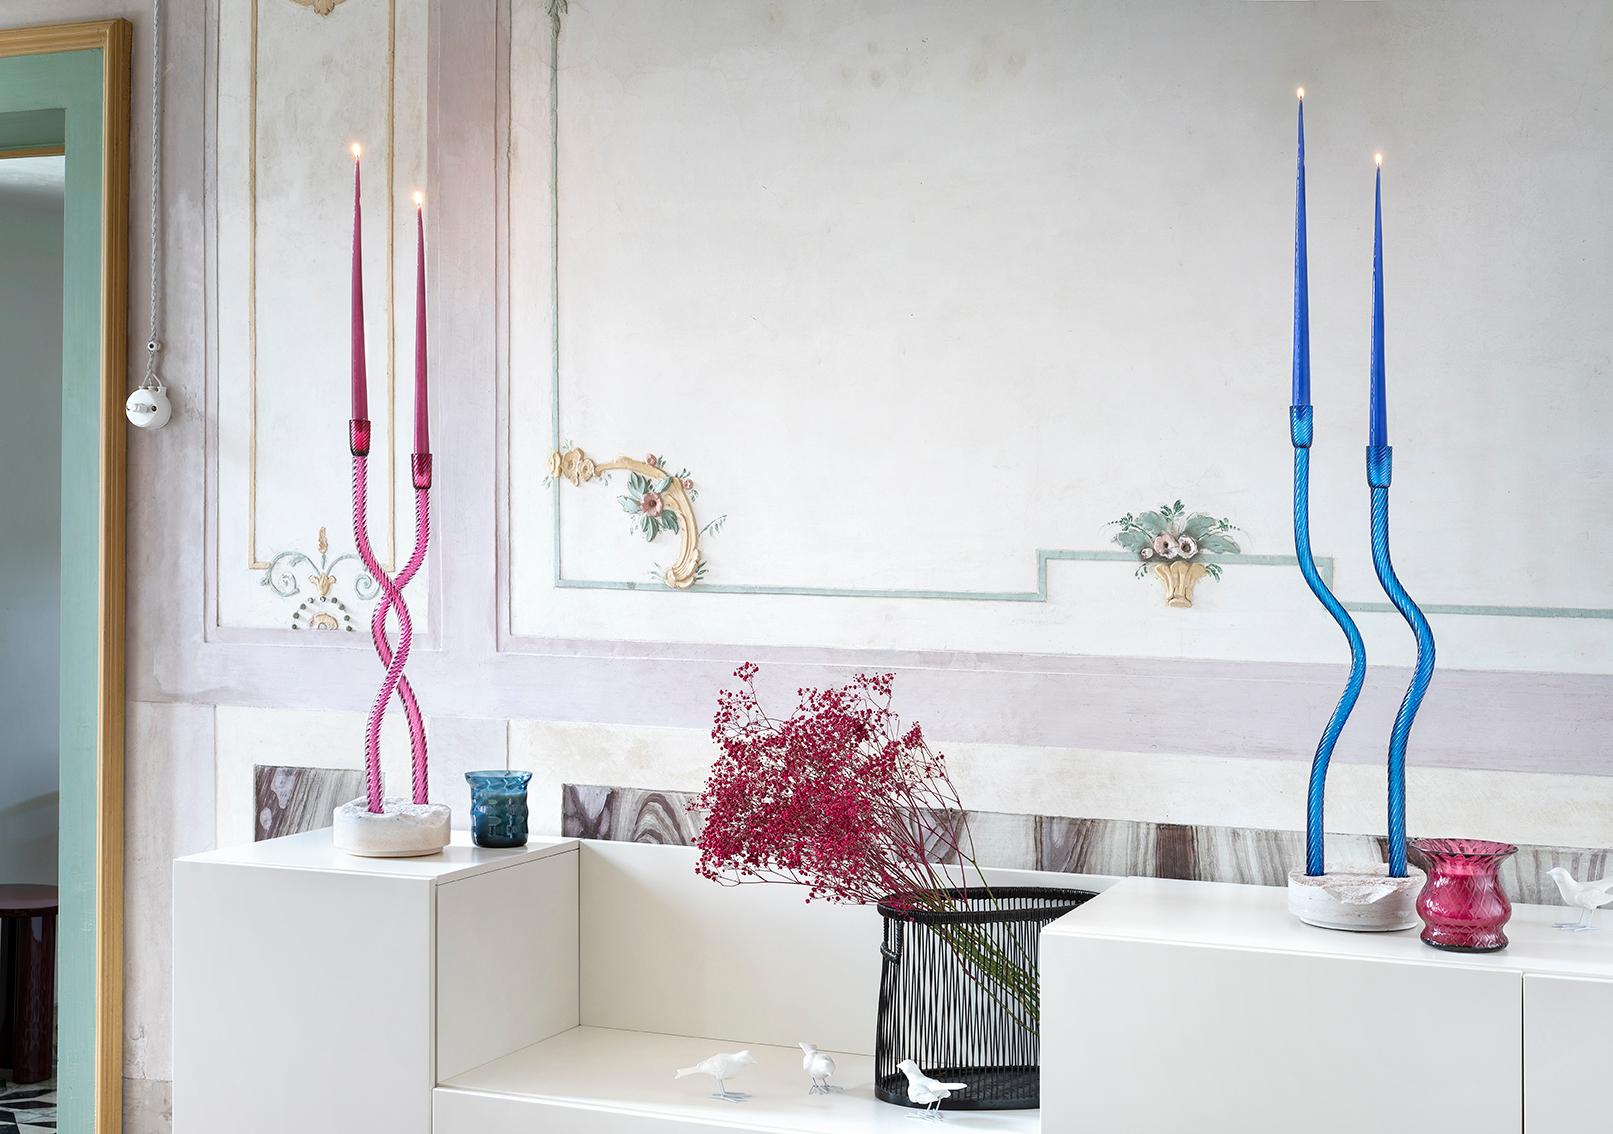 The piece Hug of Artisans is honoring different materials as marble and glass in one unique décor piece. Together are creating the quiescence of the Italian hand and beautifully made.